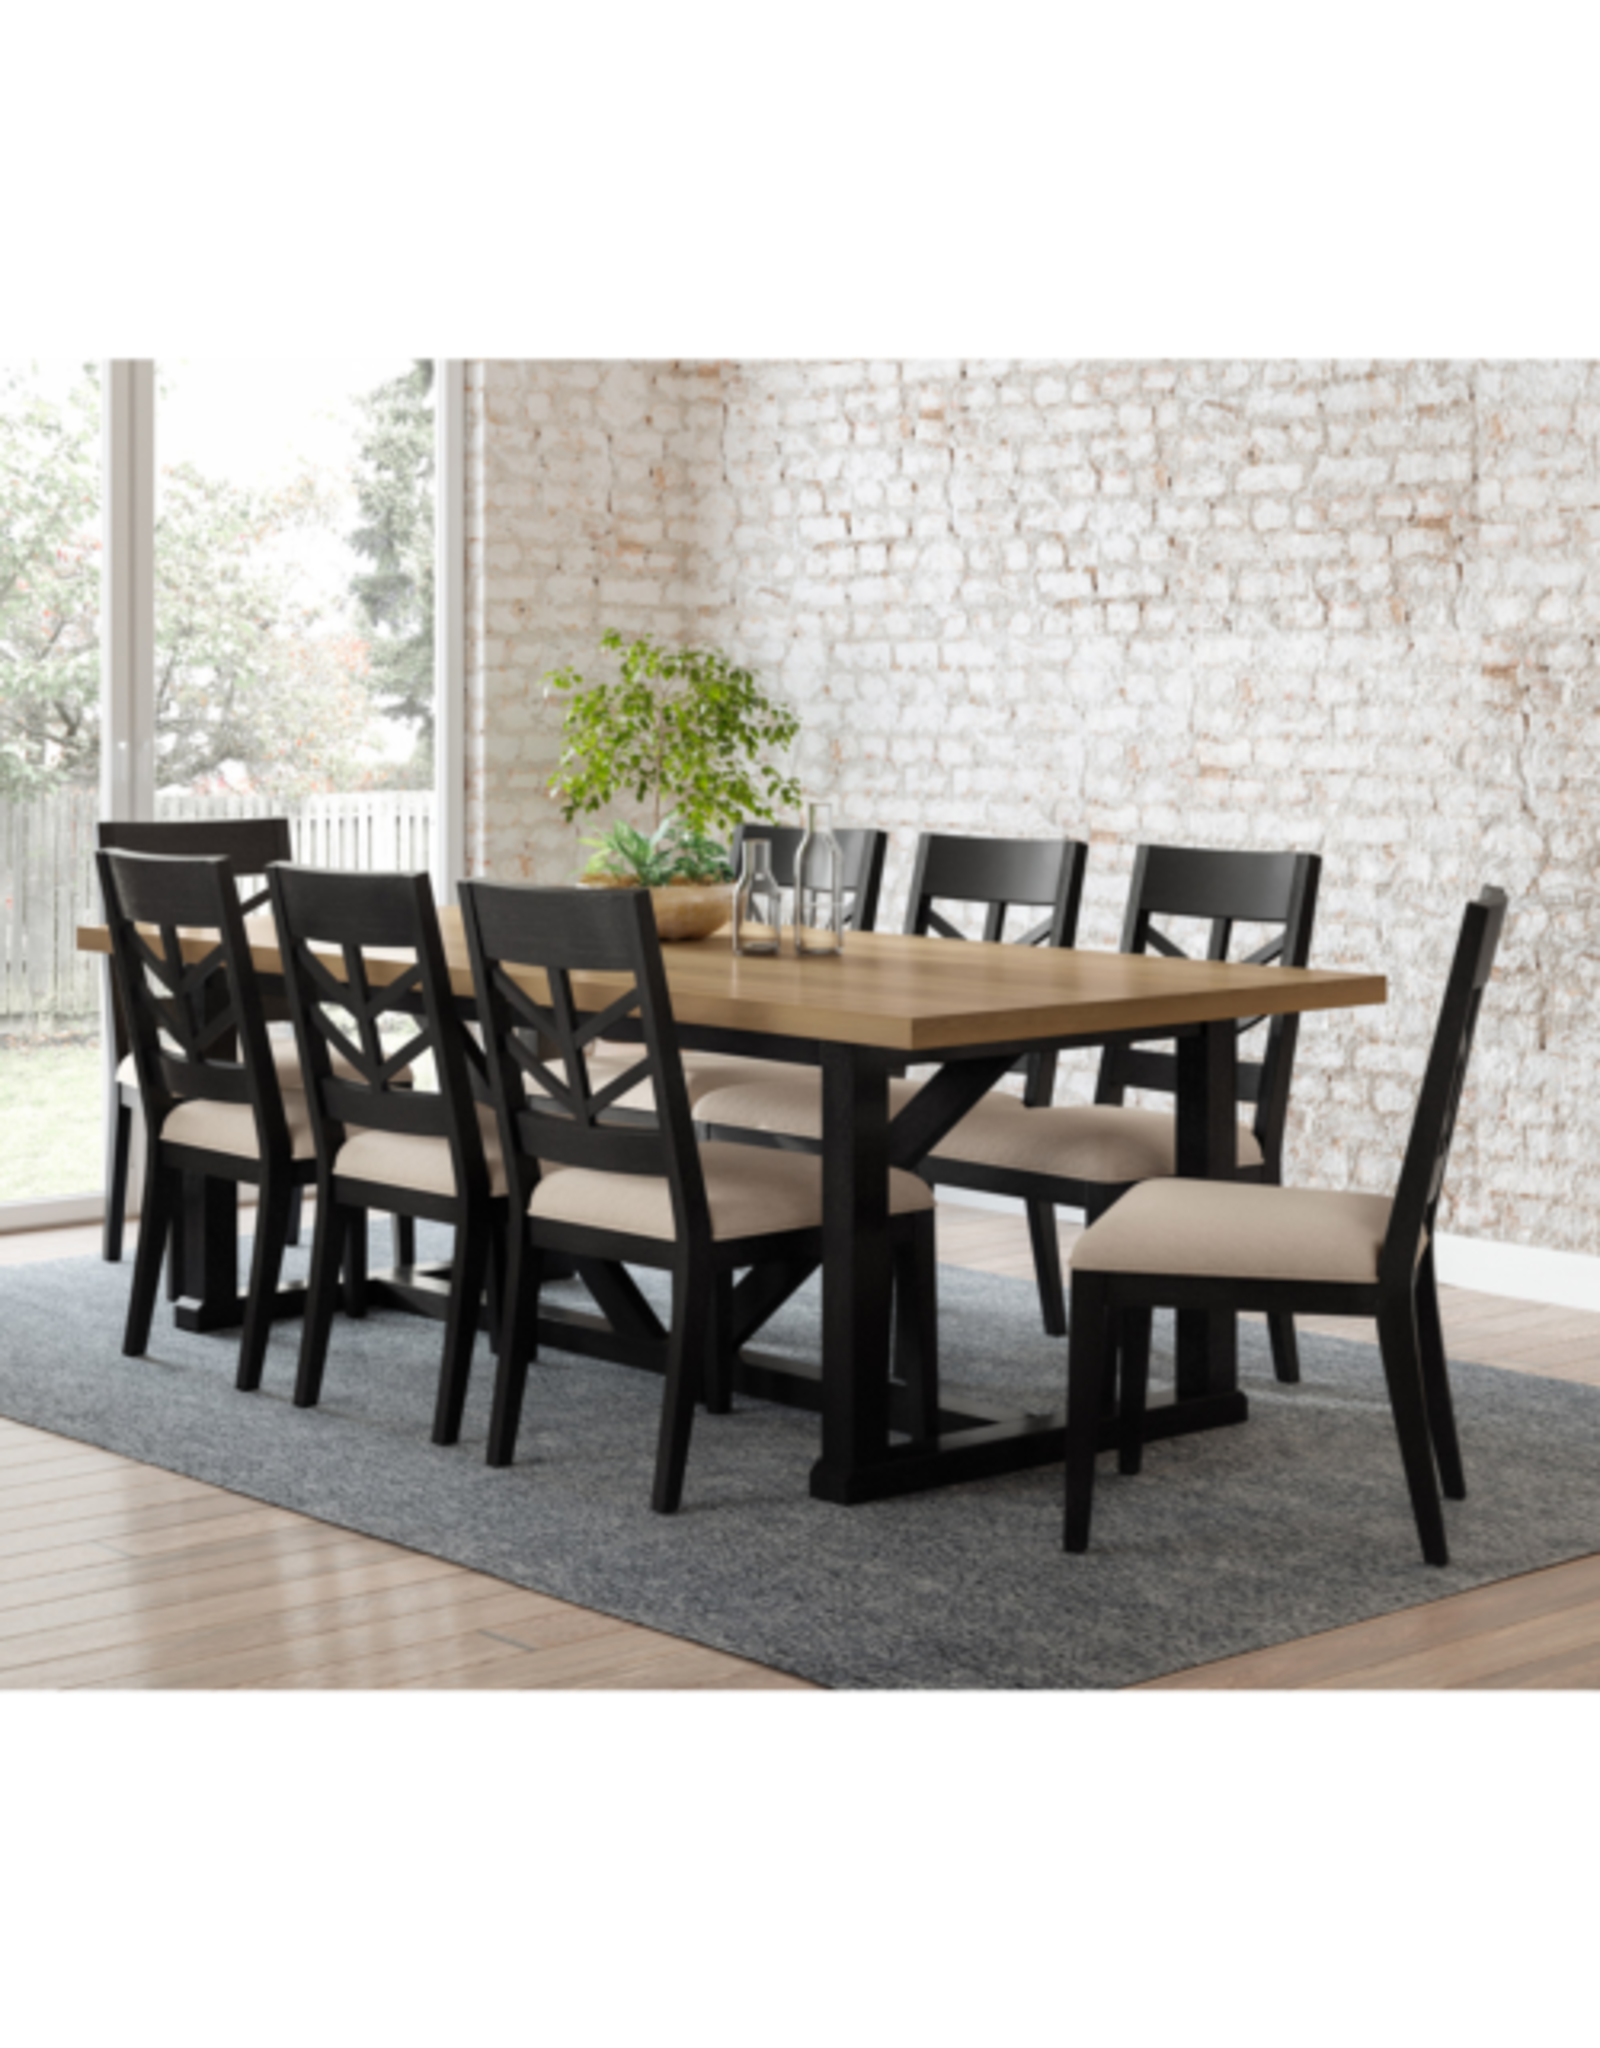 MORRISON 1570142 Morrison 9-piece Dining Set Features: Natural Brown Finished Top Black Finished Base Mahogany Solids and Oak Veneers Seats Upholstered in Stain Resistant Beige Fabric Adjustable Levelers